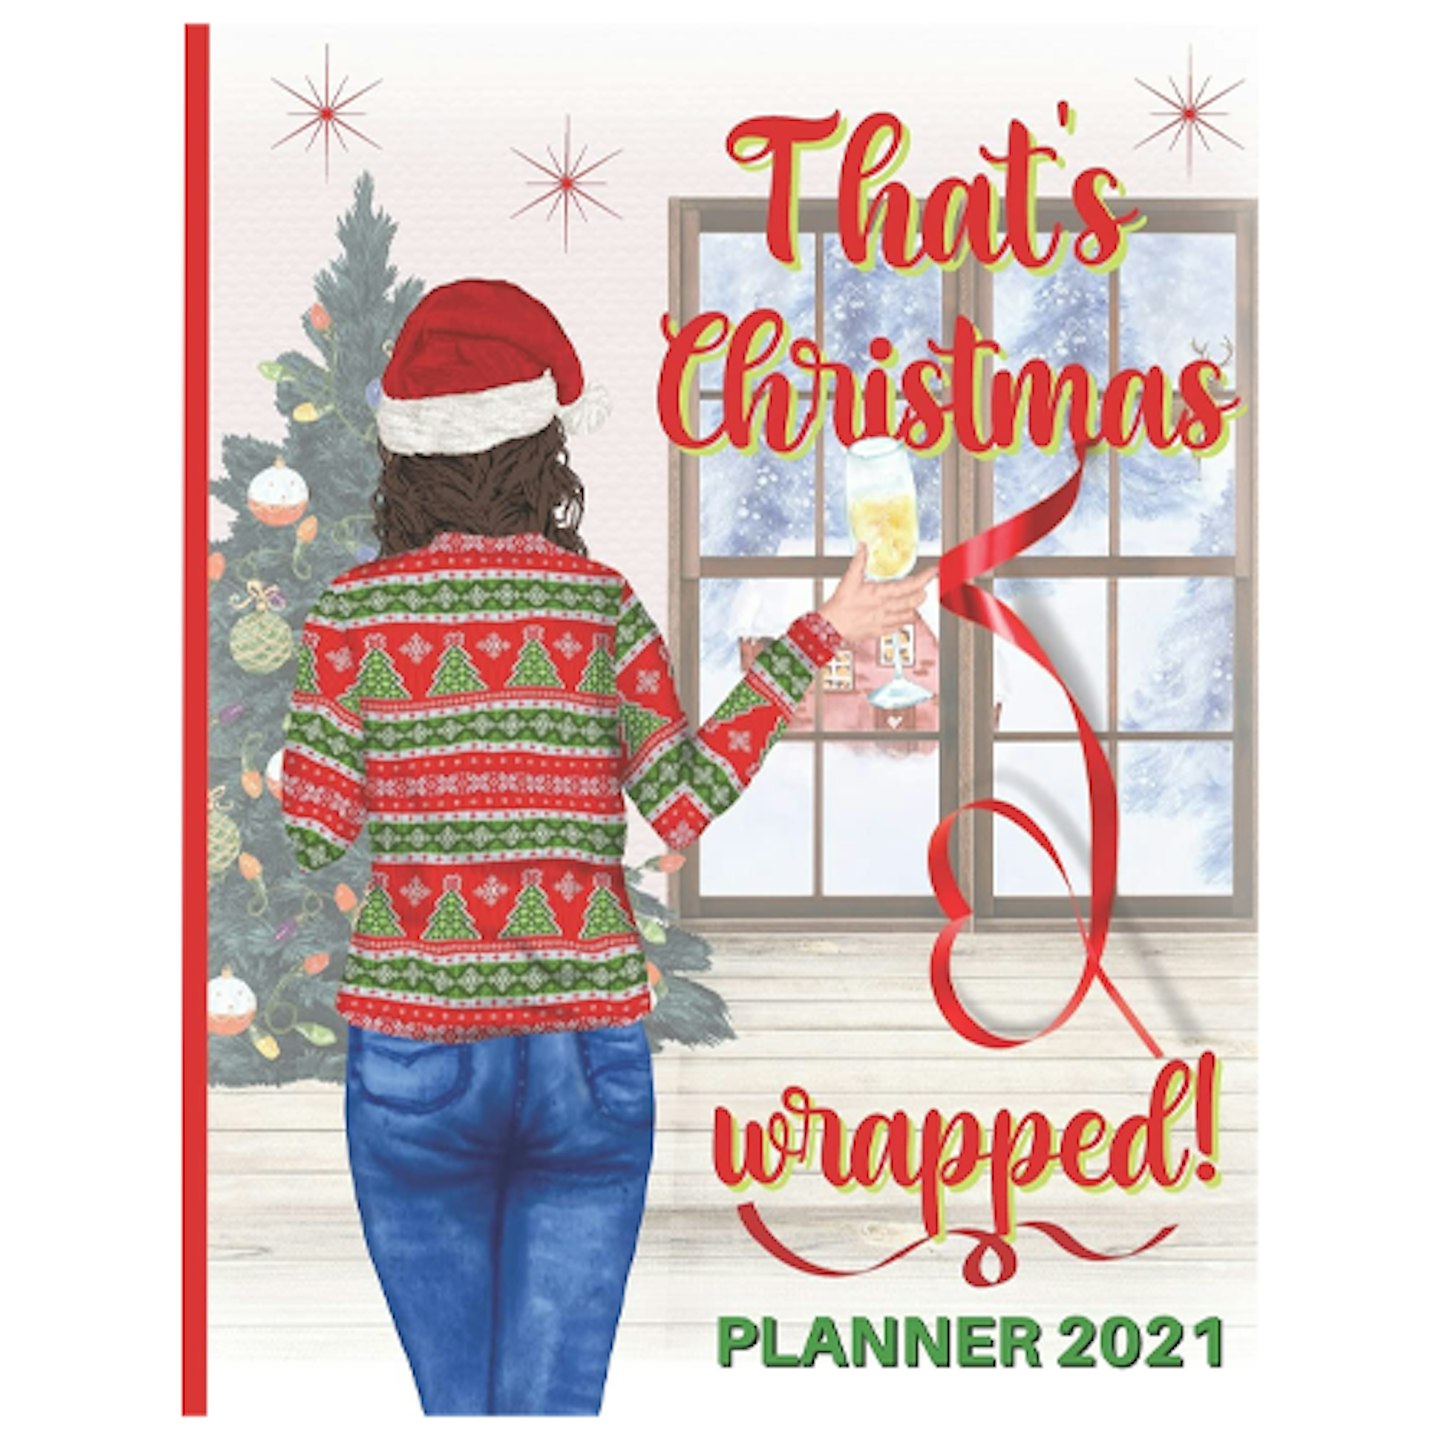 That's Christmas Wrapped! Planner 2021